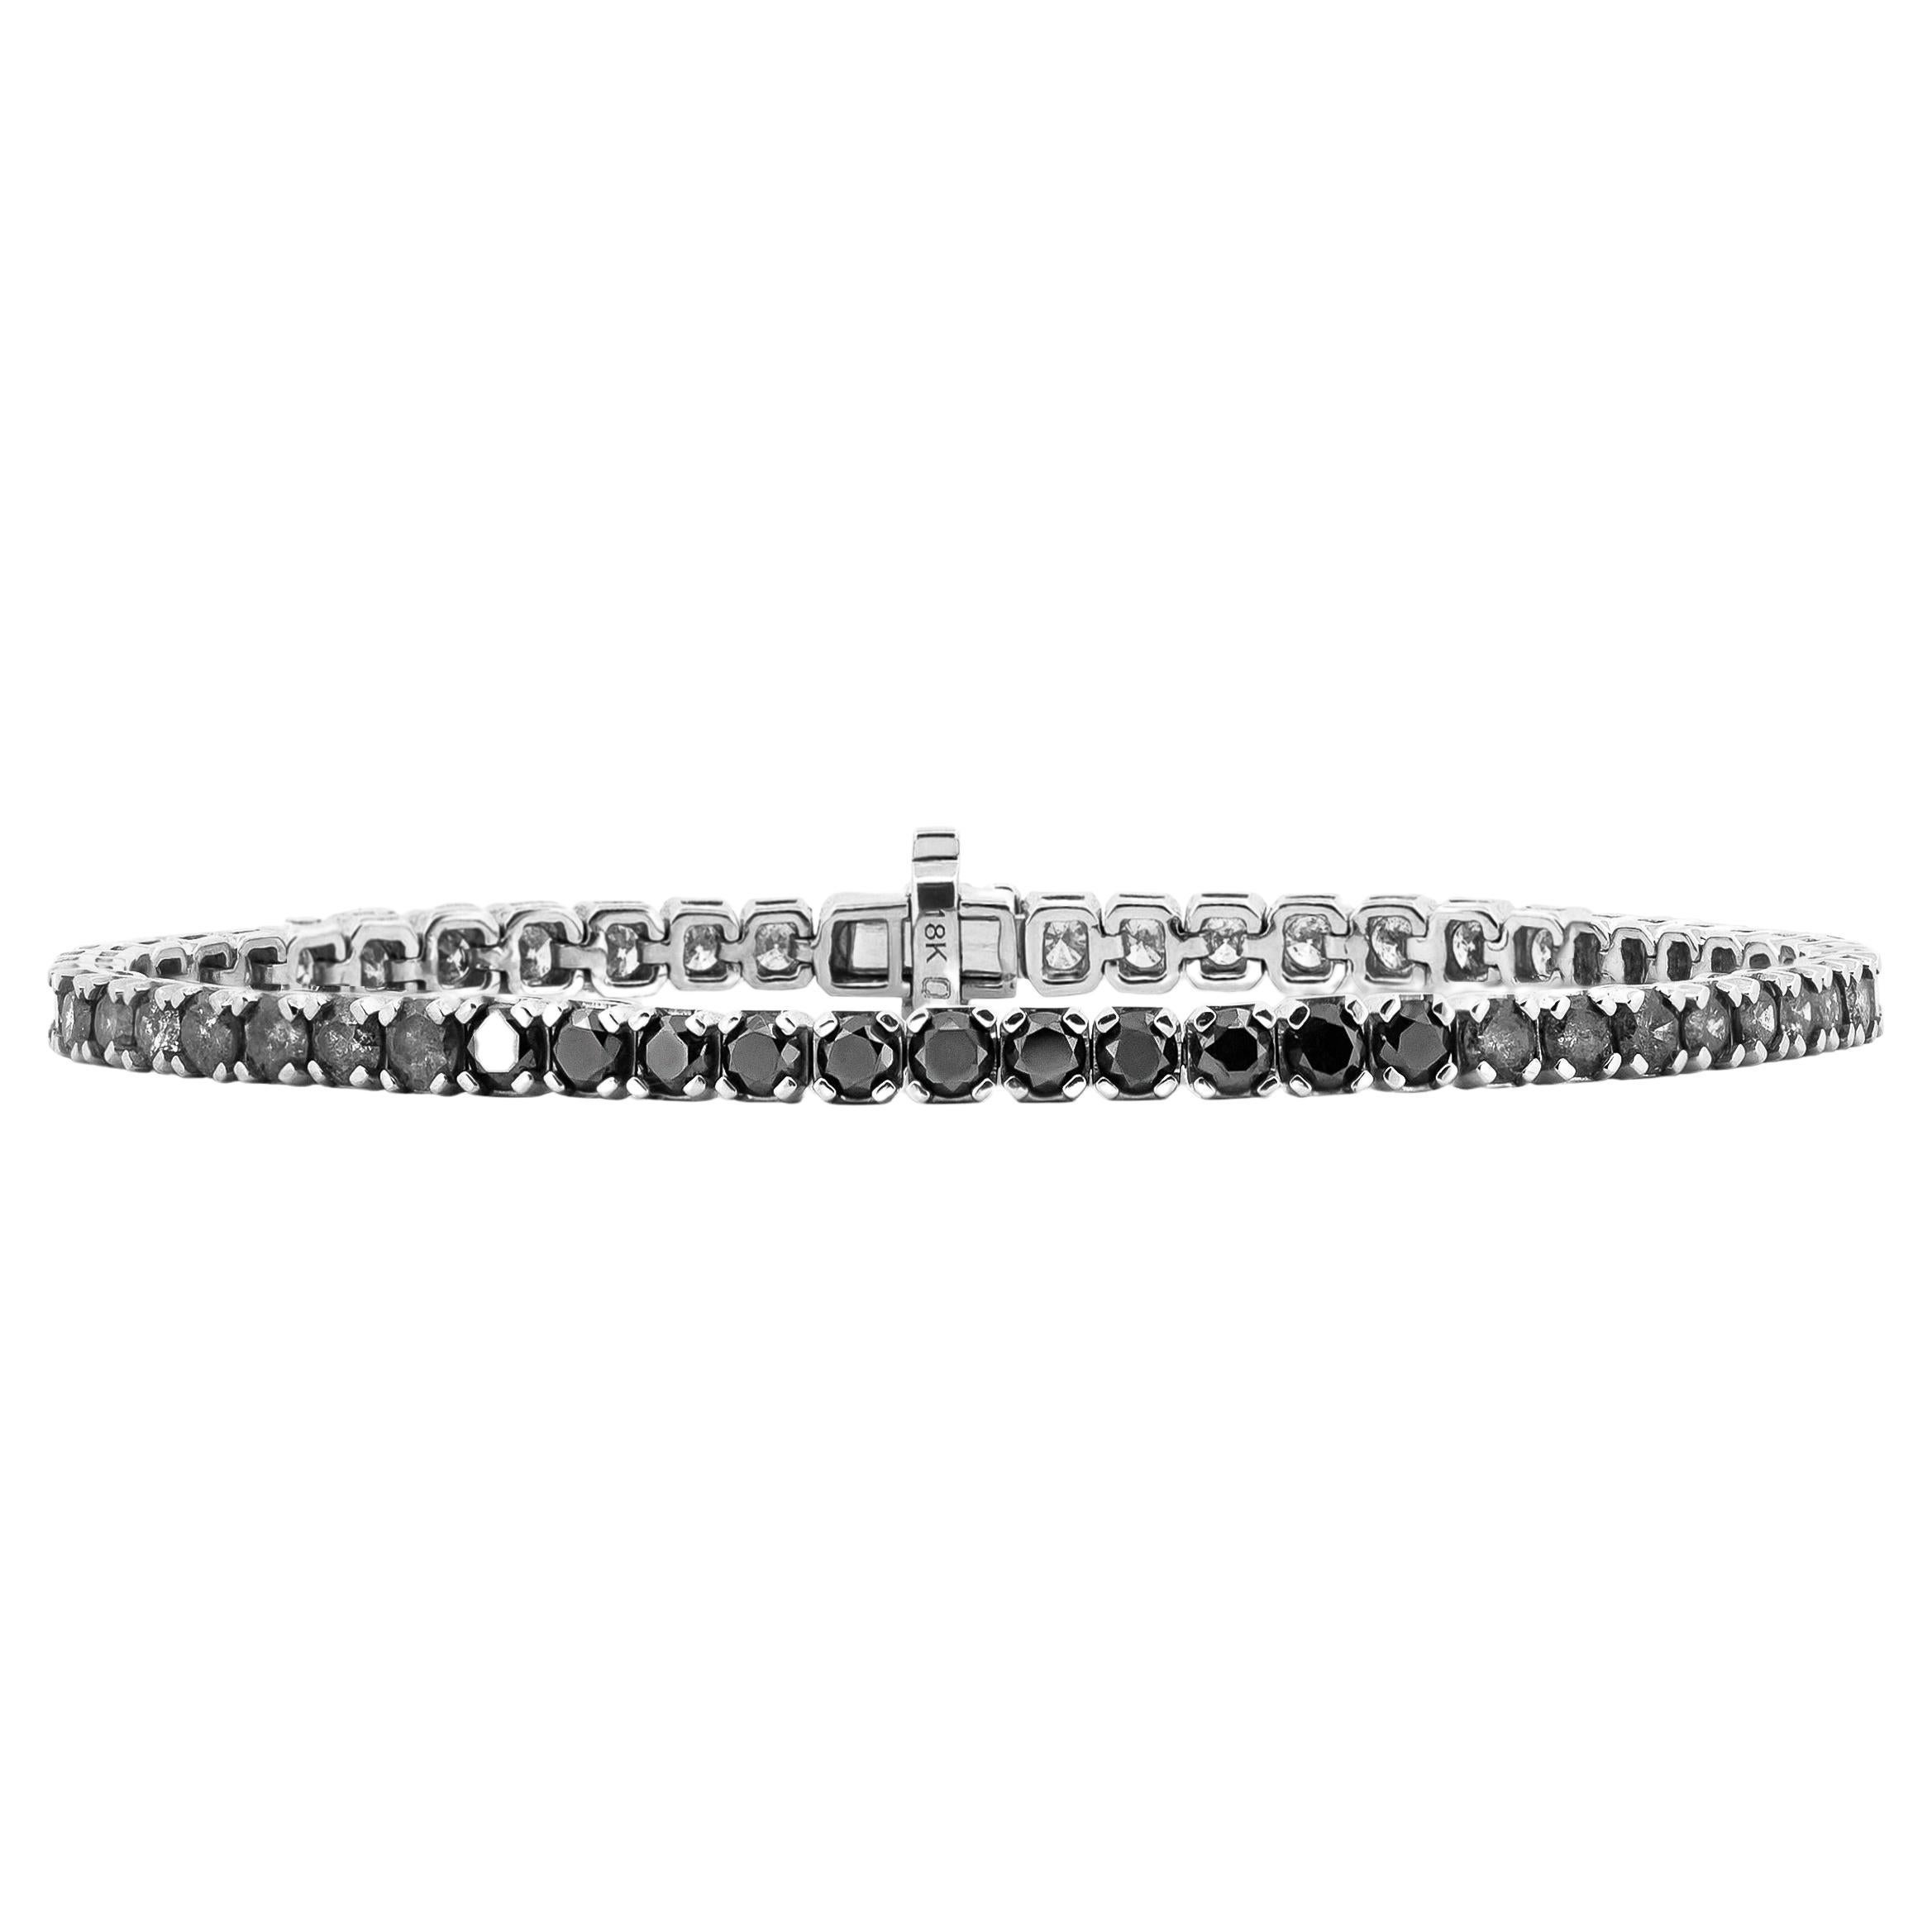 The Process Spectrum Tennis Bracelet is 18k White Gold with 10 pt White, Salt & Pepper, Black Gradient diamonds with a hidden box clasp closure. 

Width: 3.5mm wide

Please note the possibility of natural inclusions in gemstones

Made in the USA